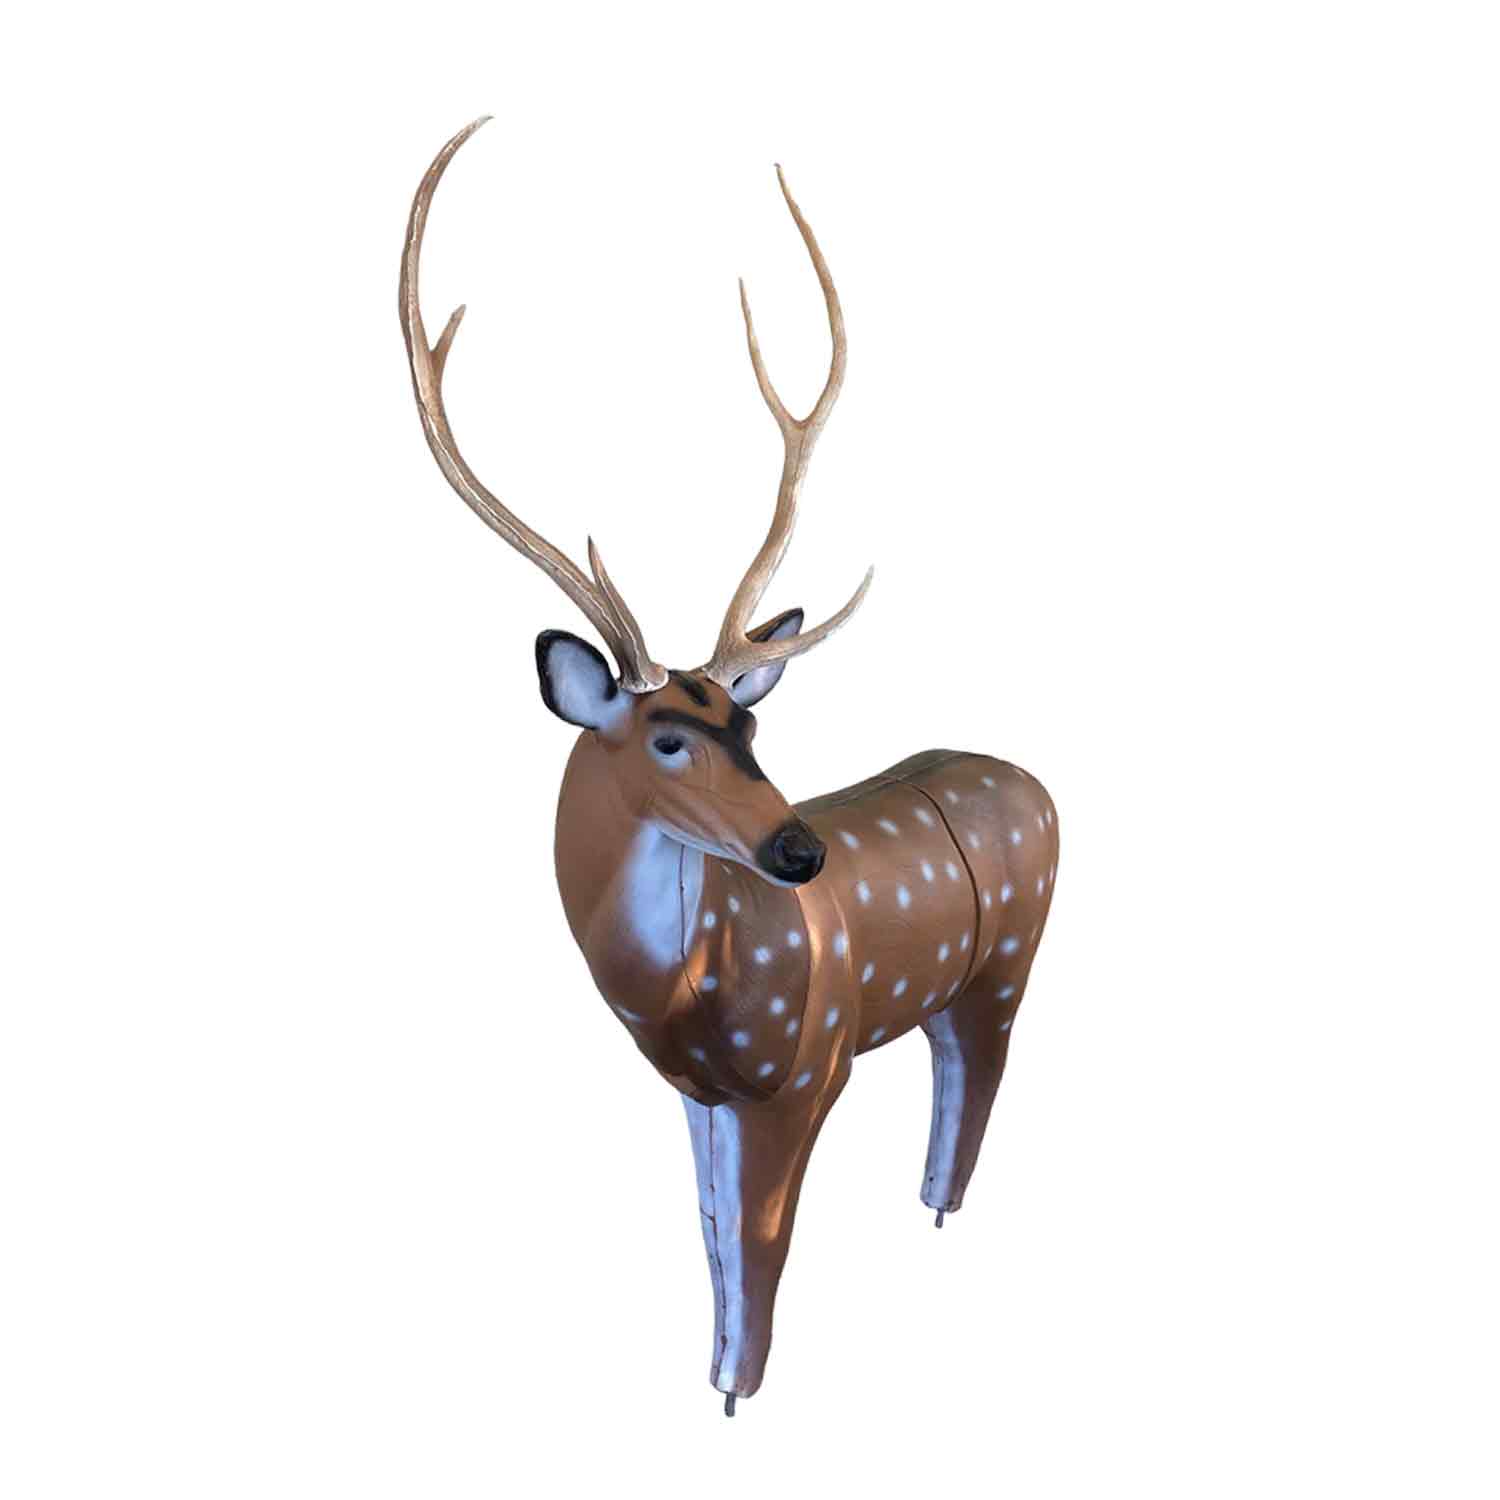 RealWild Axis Deer Competition 3D Target